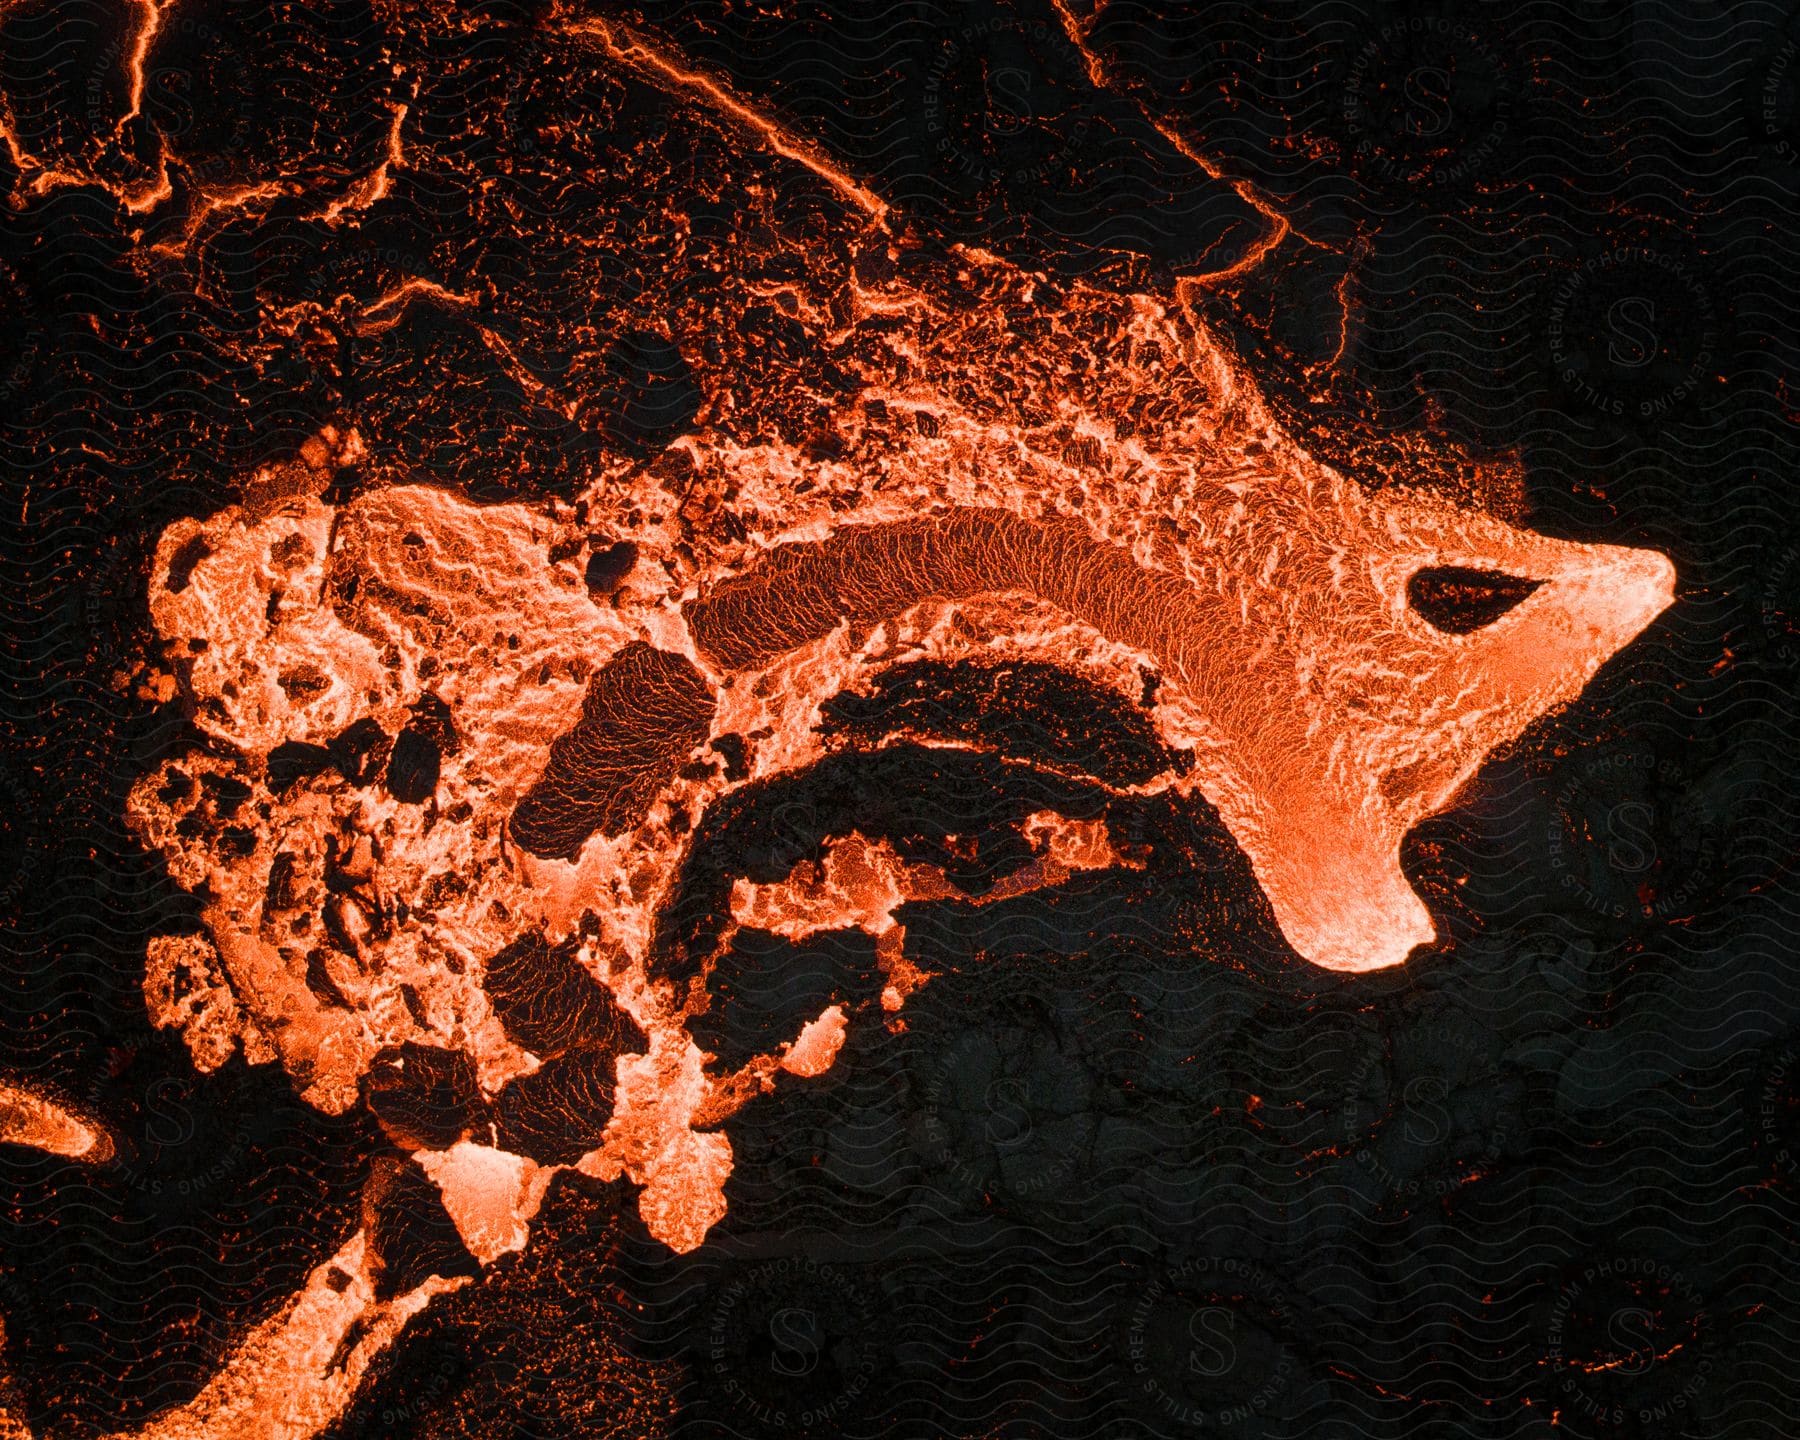 Lava flowing at night